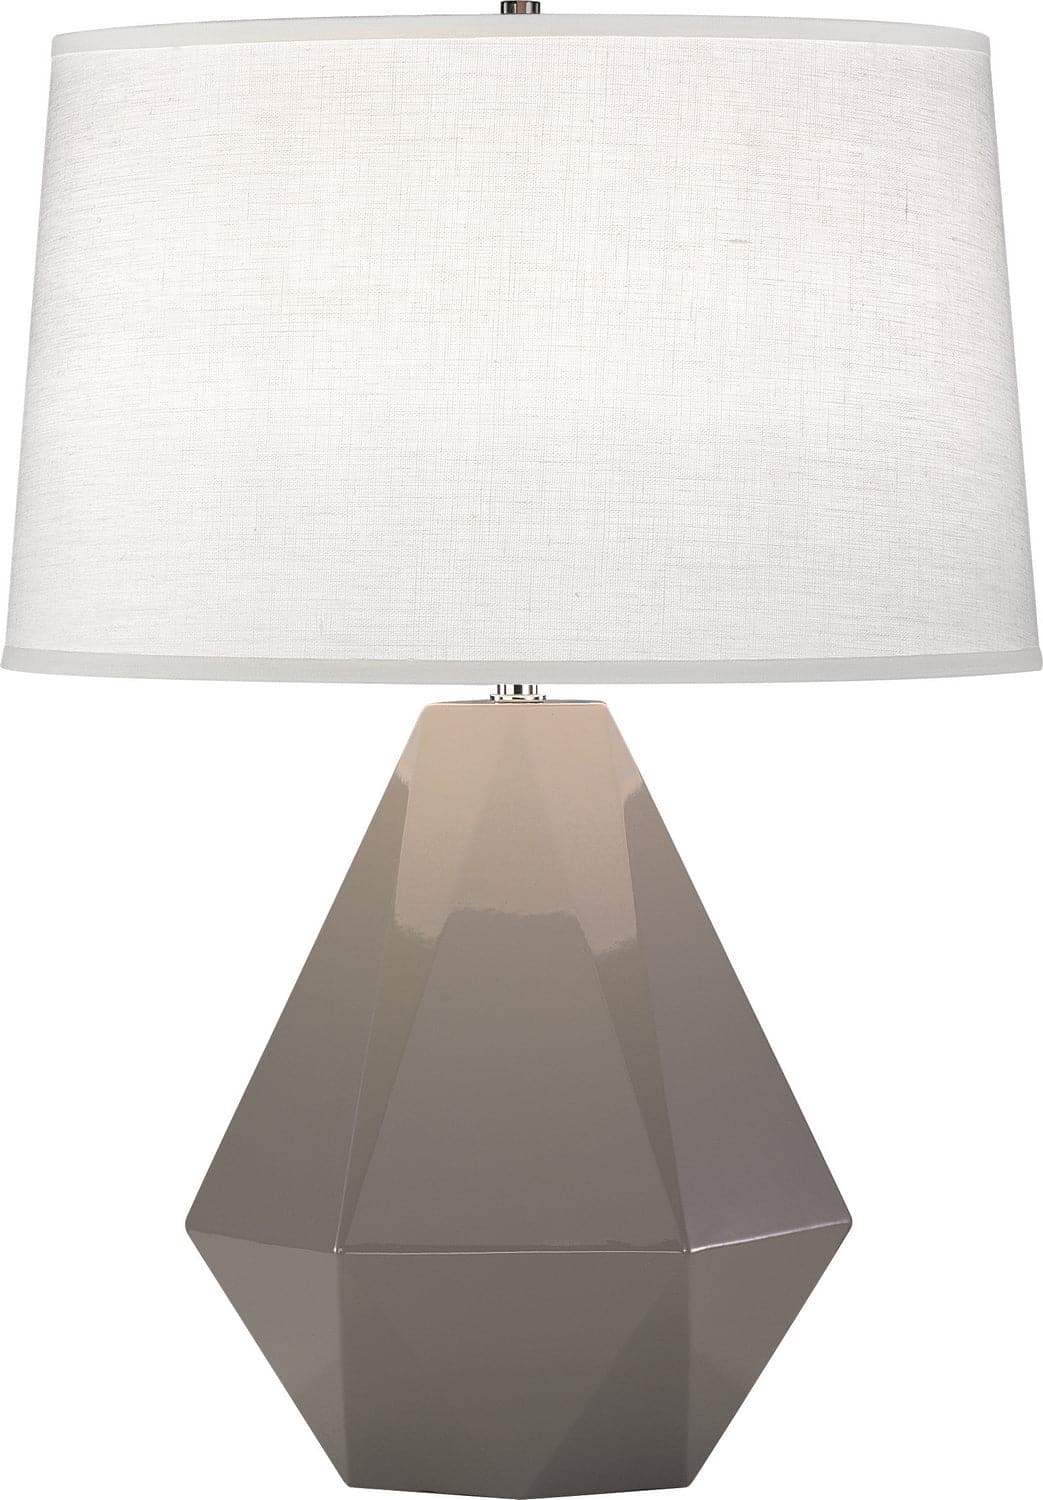 Robert Abbey - 942 - One Light Table Lamp - Delta - Smoky Taupe Glazed w/Polished Nickel